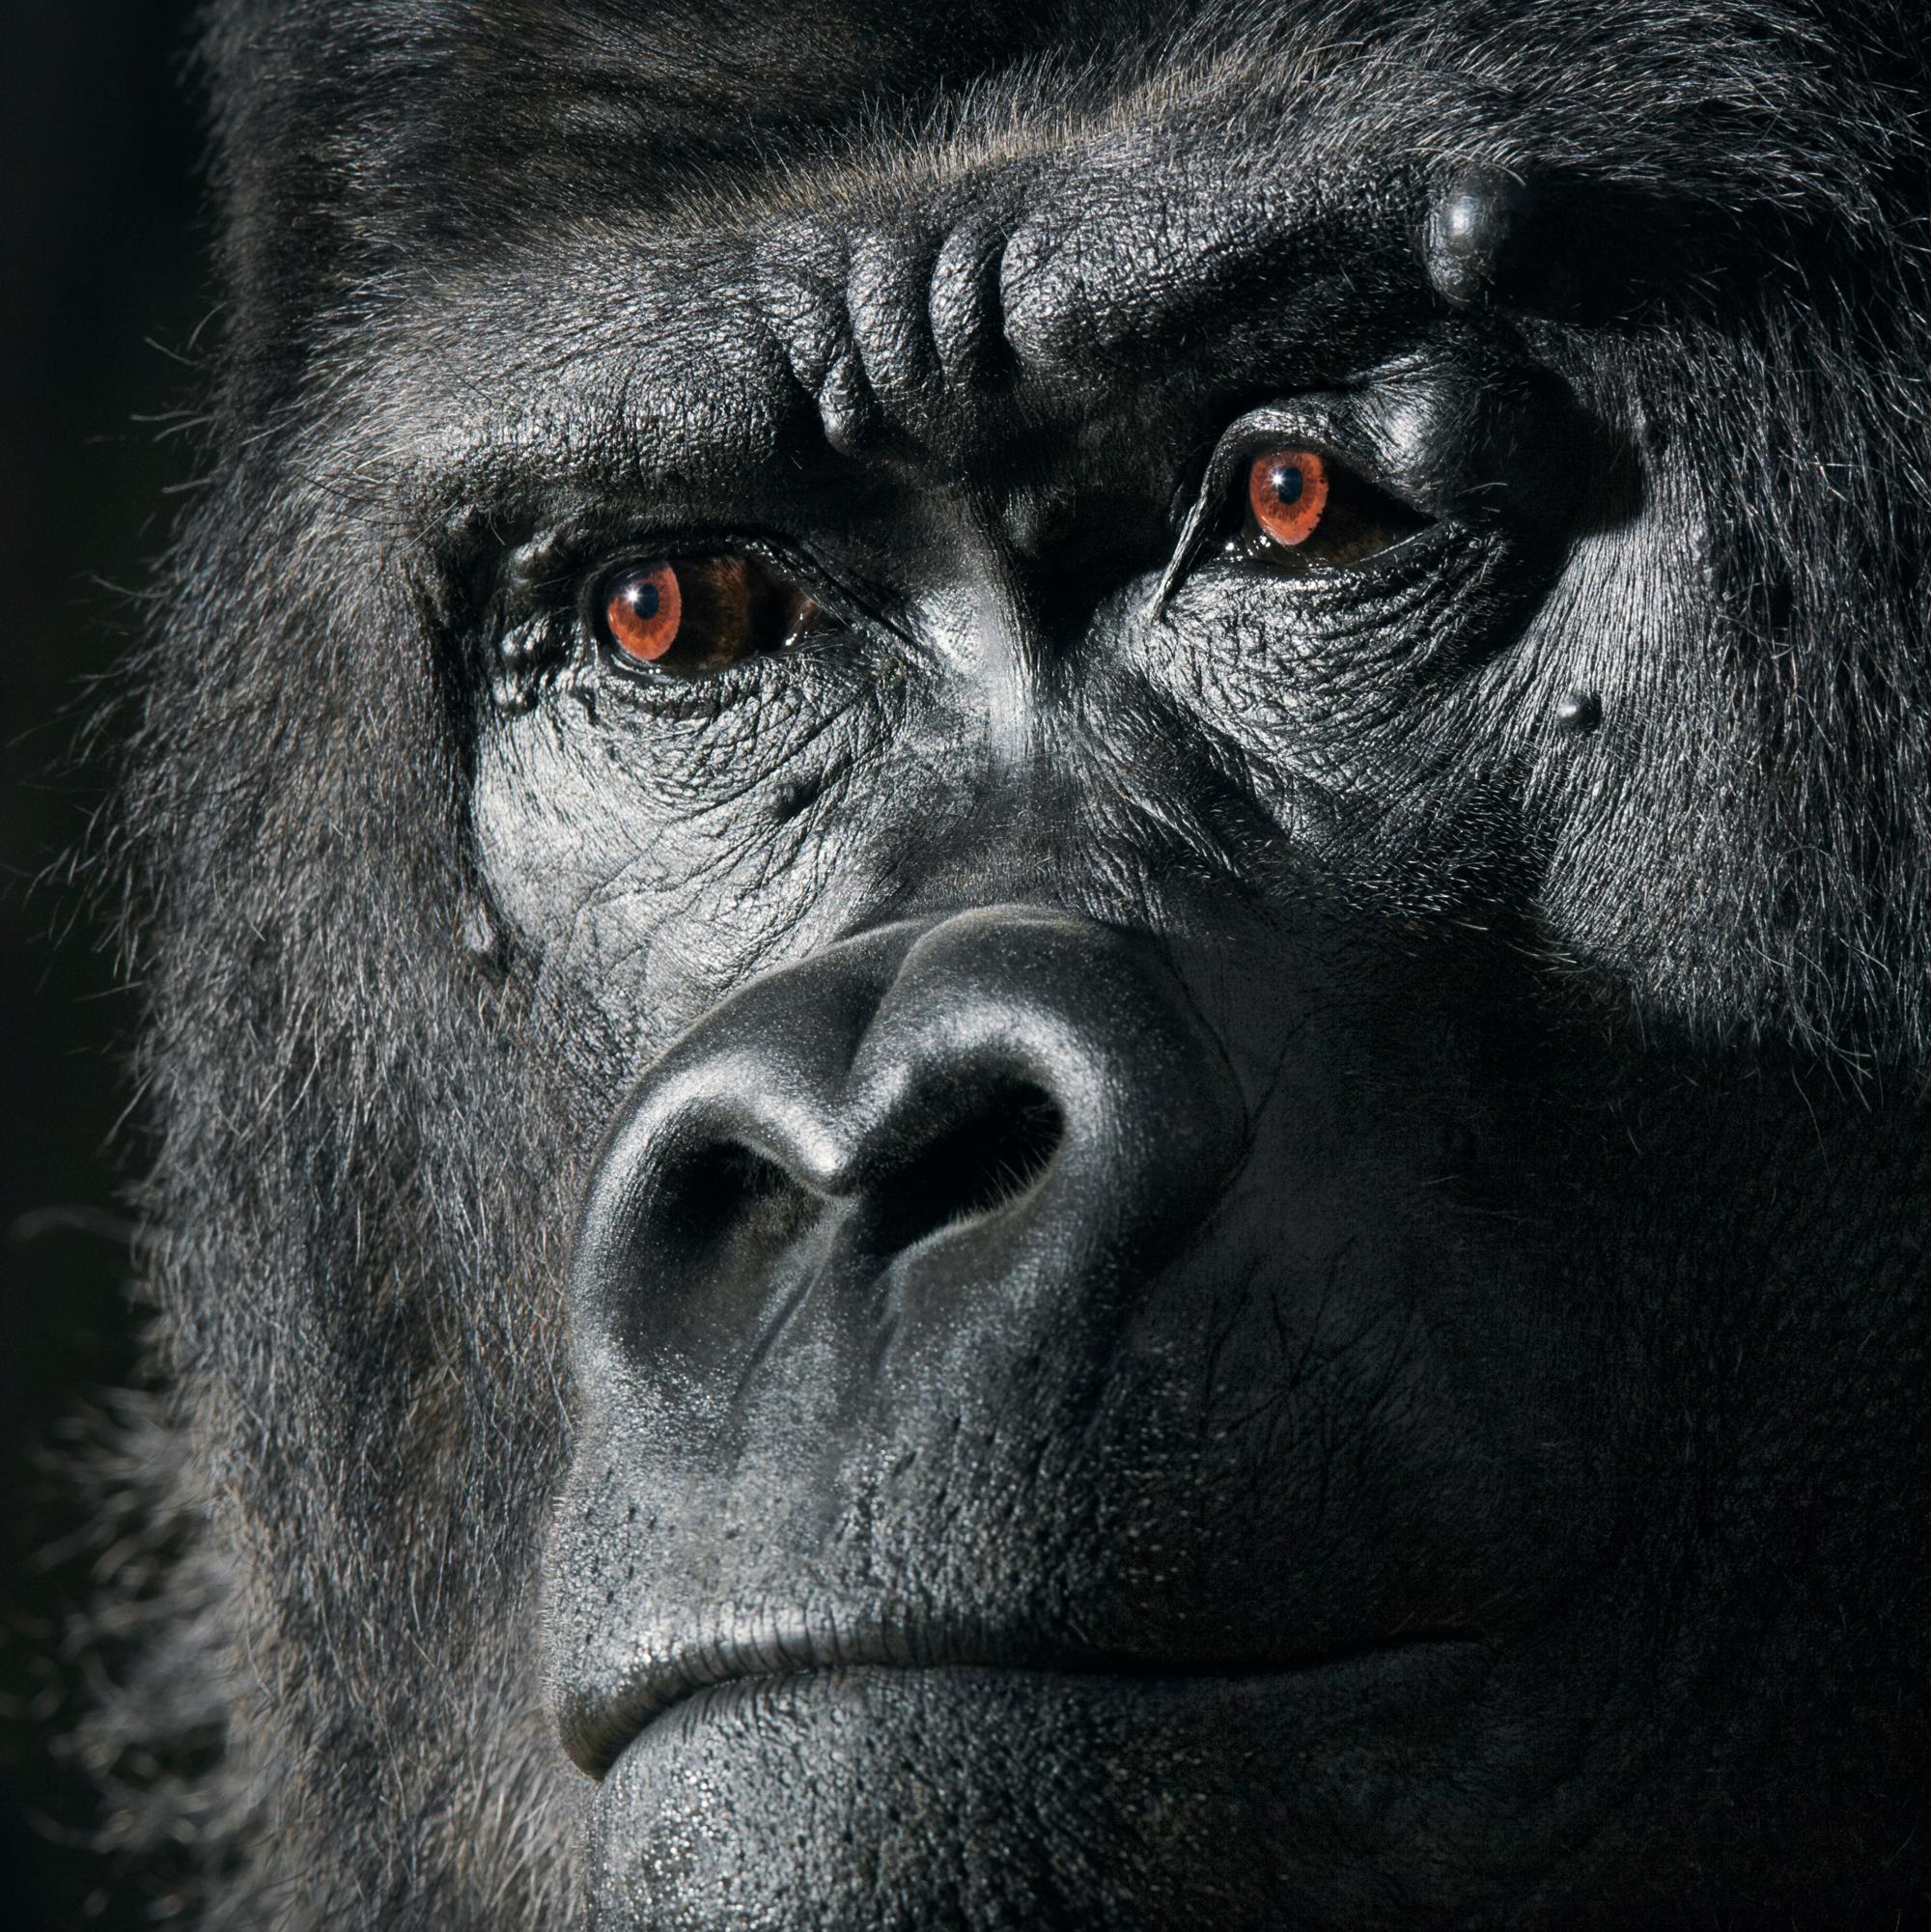 Please bear in mind that all prints are produced to order. Lead times are expected between 15-20 days.

'Djala' is a stunning C-Type print by contemporary British photographer Tim Flach available in this size in Edition 7/10.

Flach has mainly